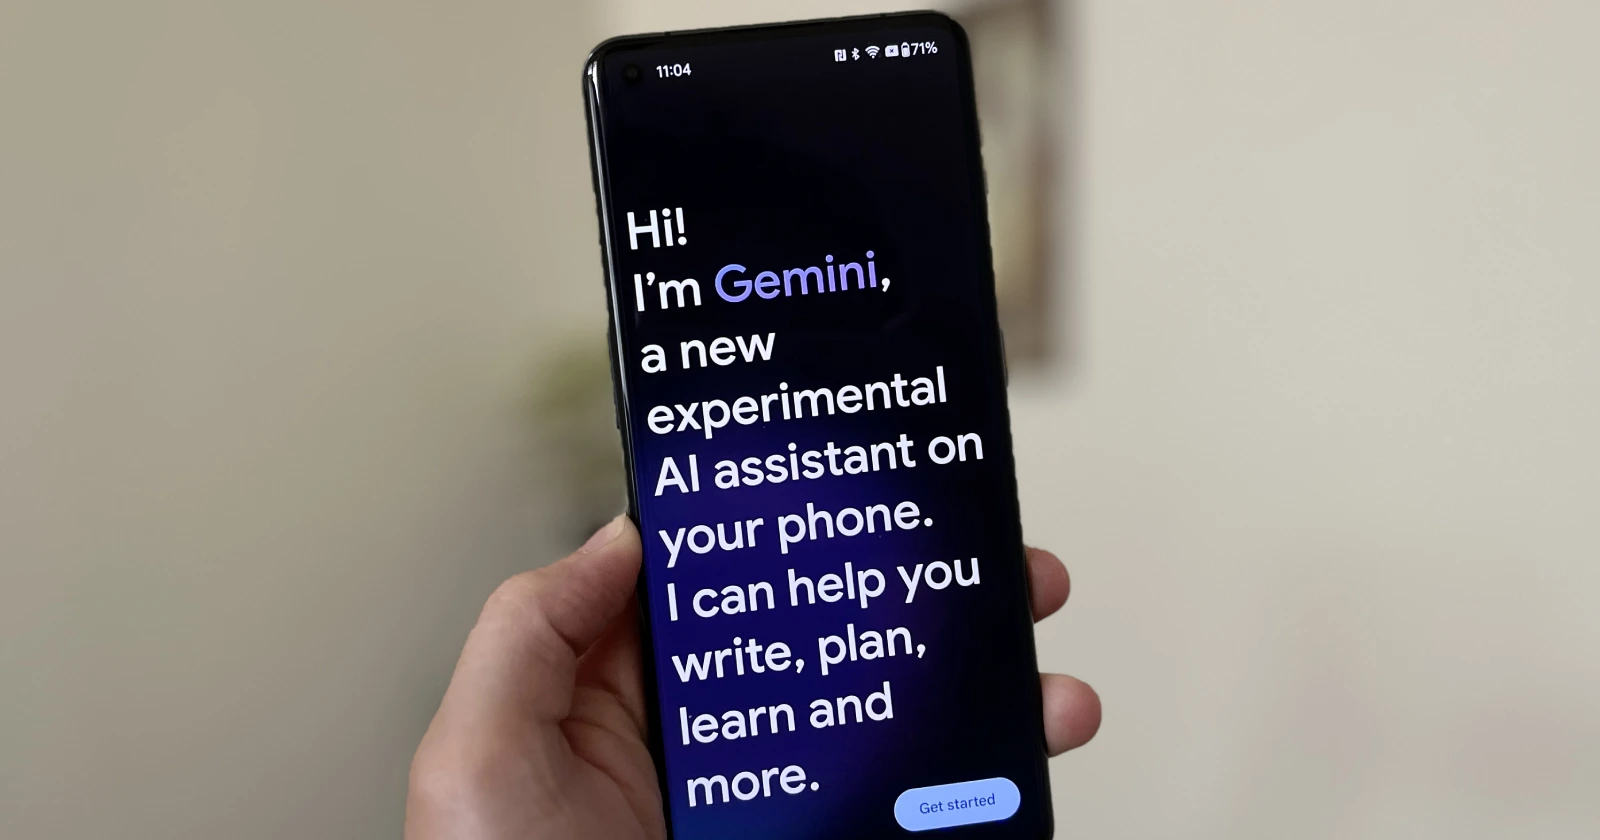 I was about to dismiss the Gemini app, but Google has got me rethinking